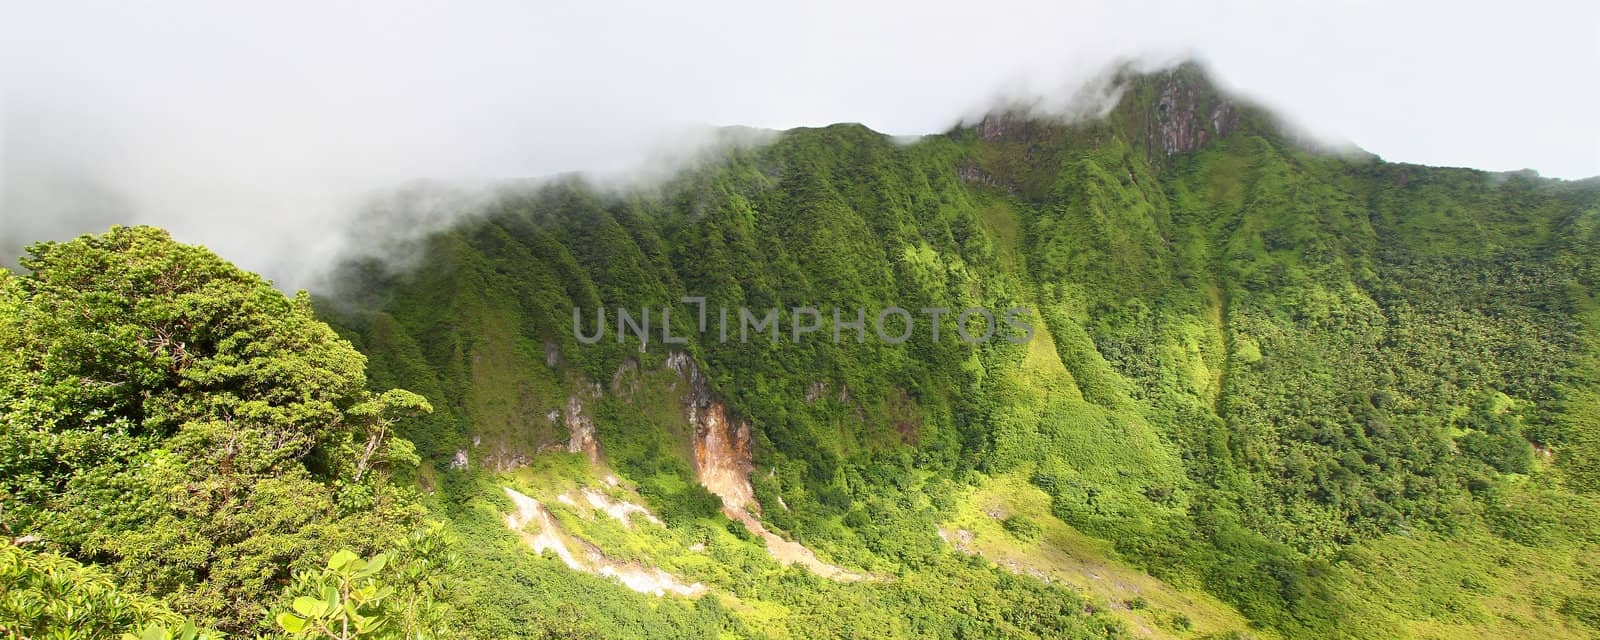 The Crater below cloud covered Mount Liamuiga on Saint Kitts.